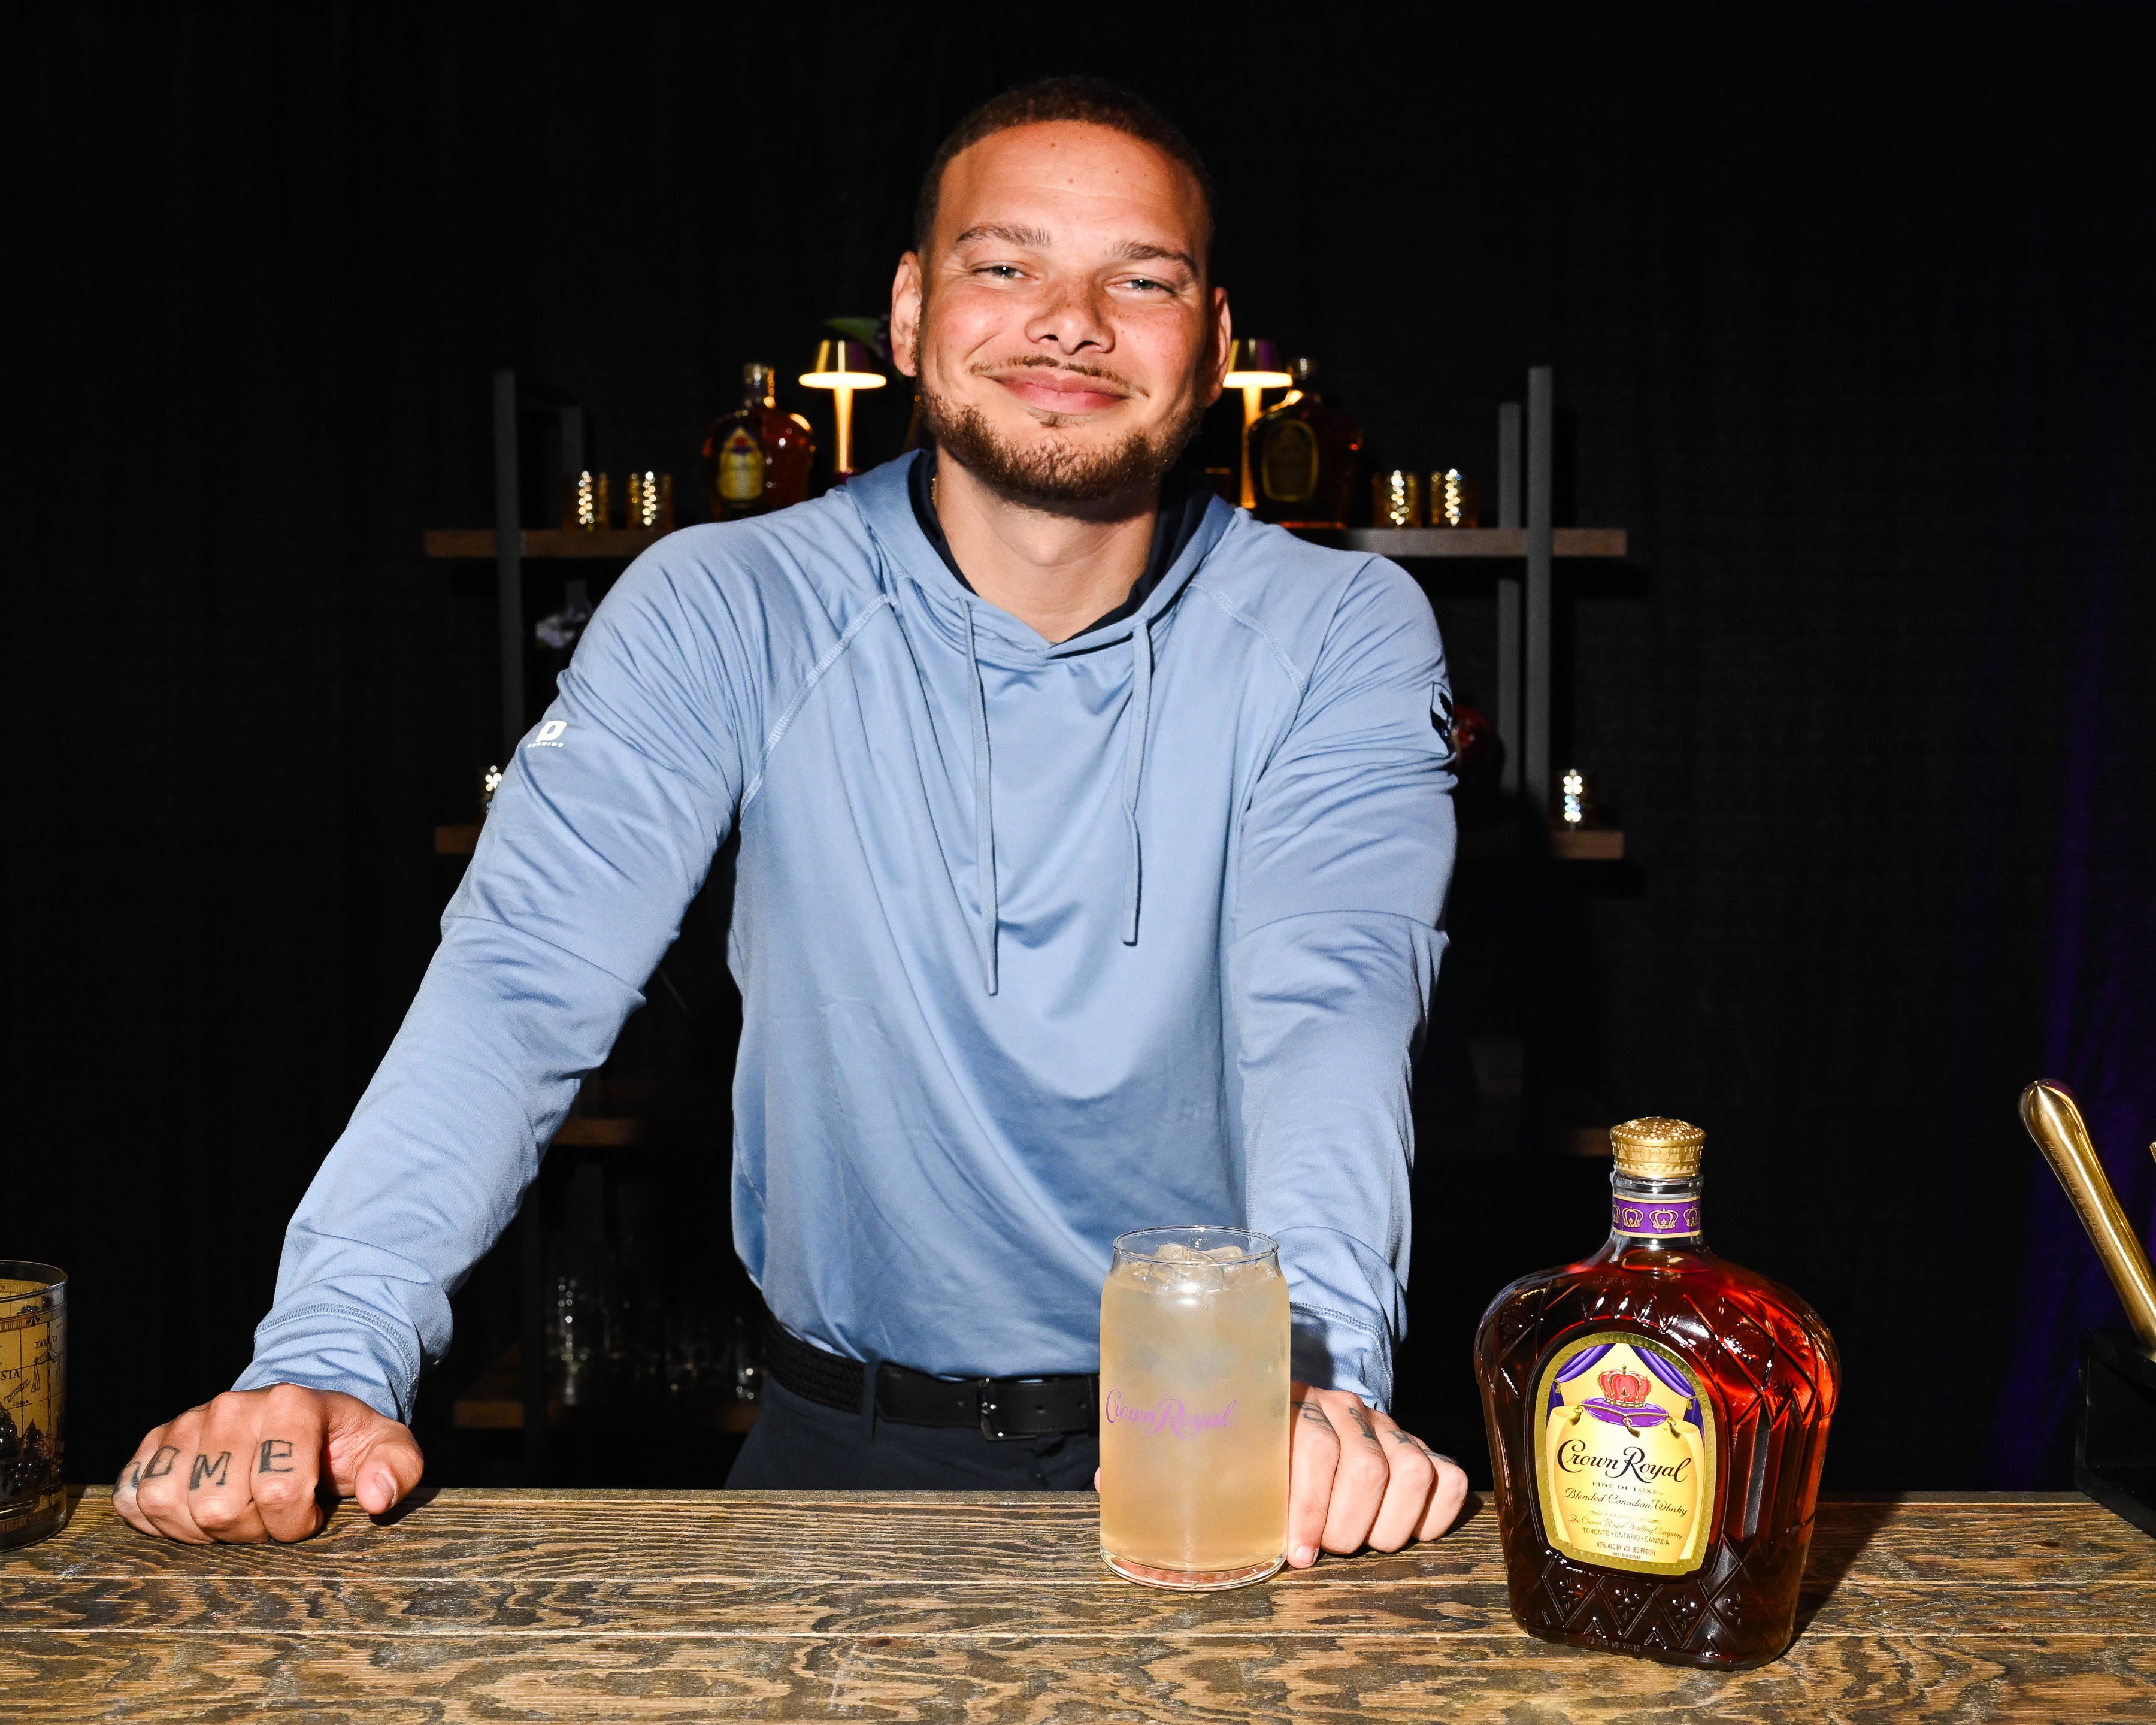 Crown Royal Presents Kane Brown's In The Air Tour – Chicago